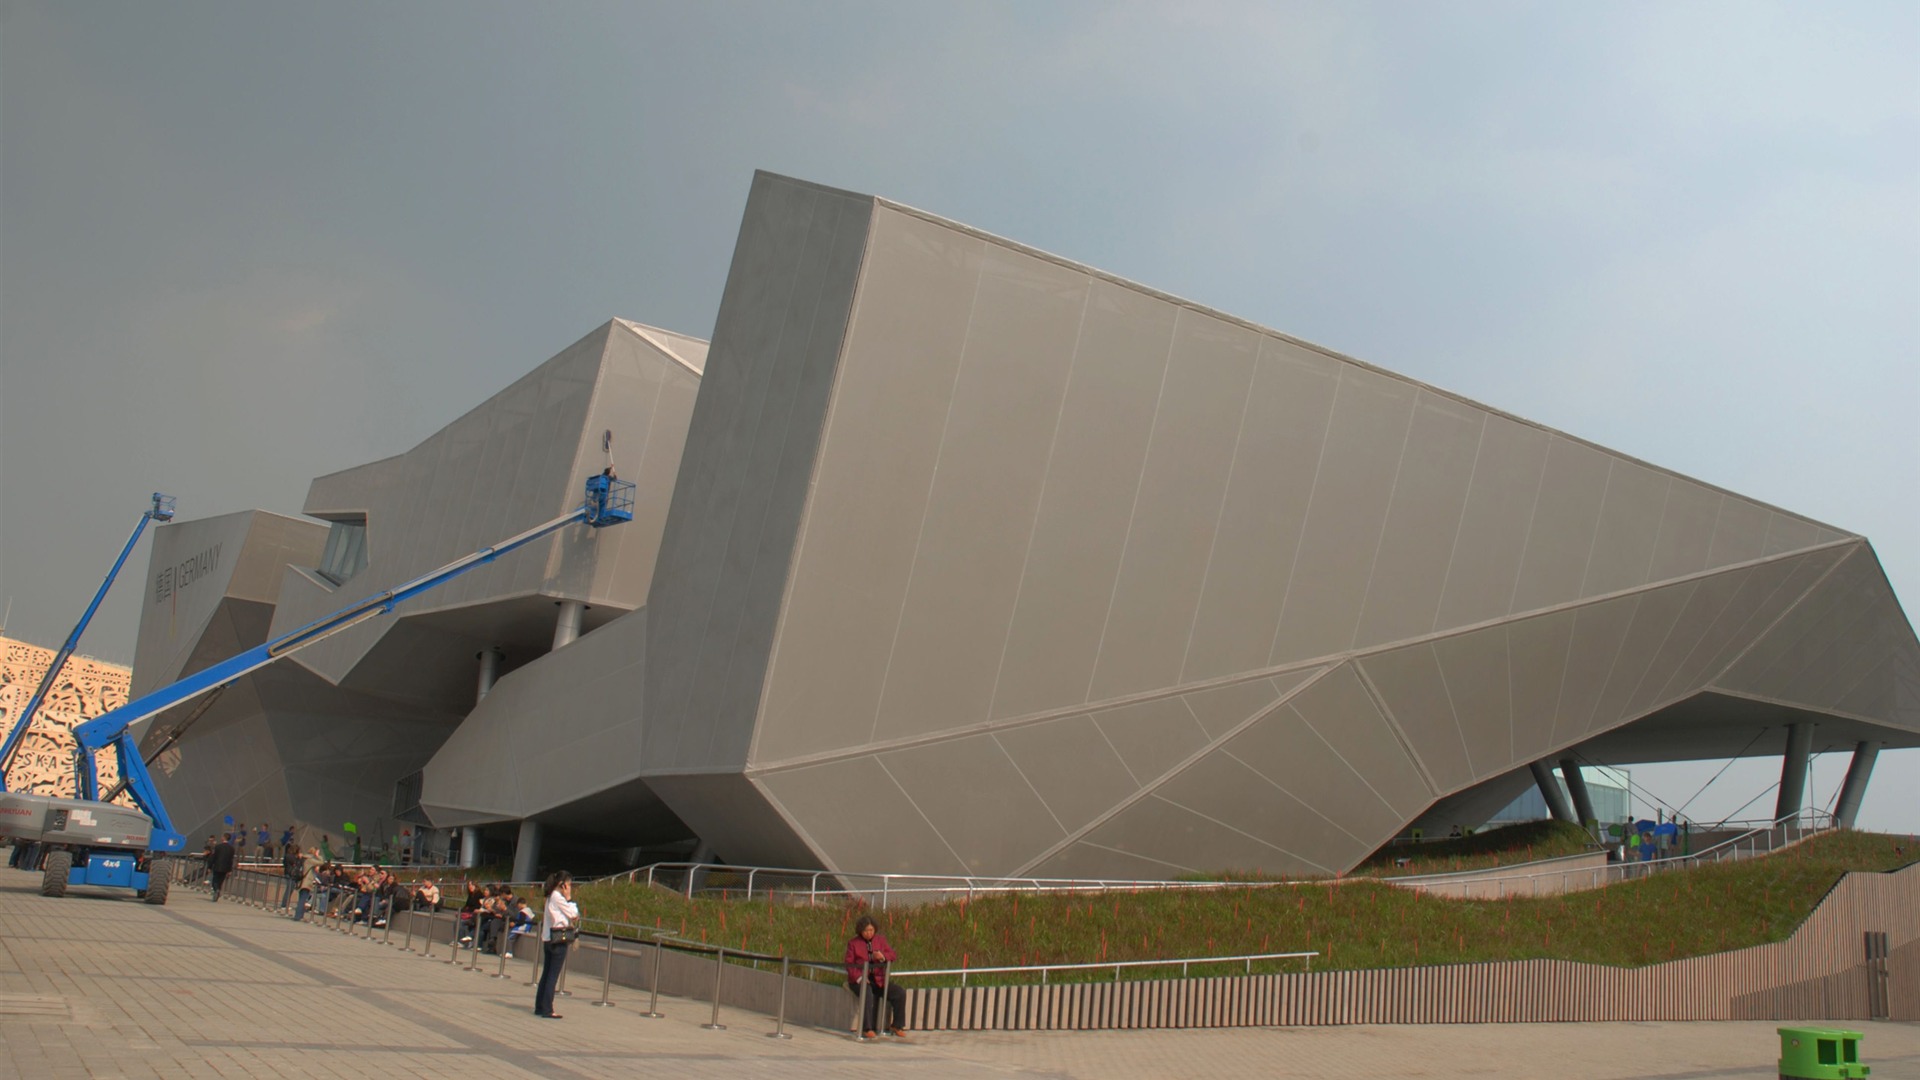 Commissioning of the 2010 Shanghai World Expo (studious works) #21 - 1920x1080